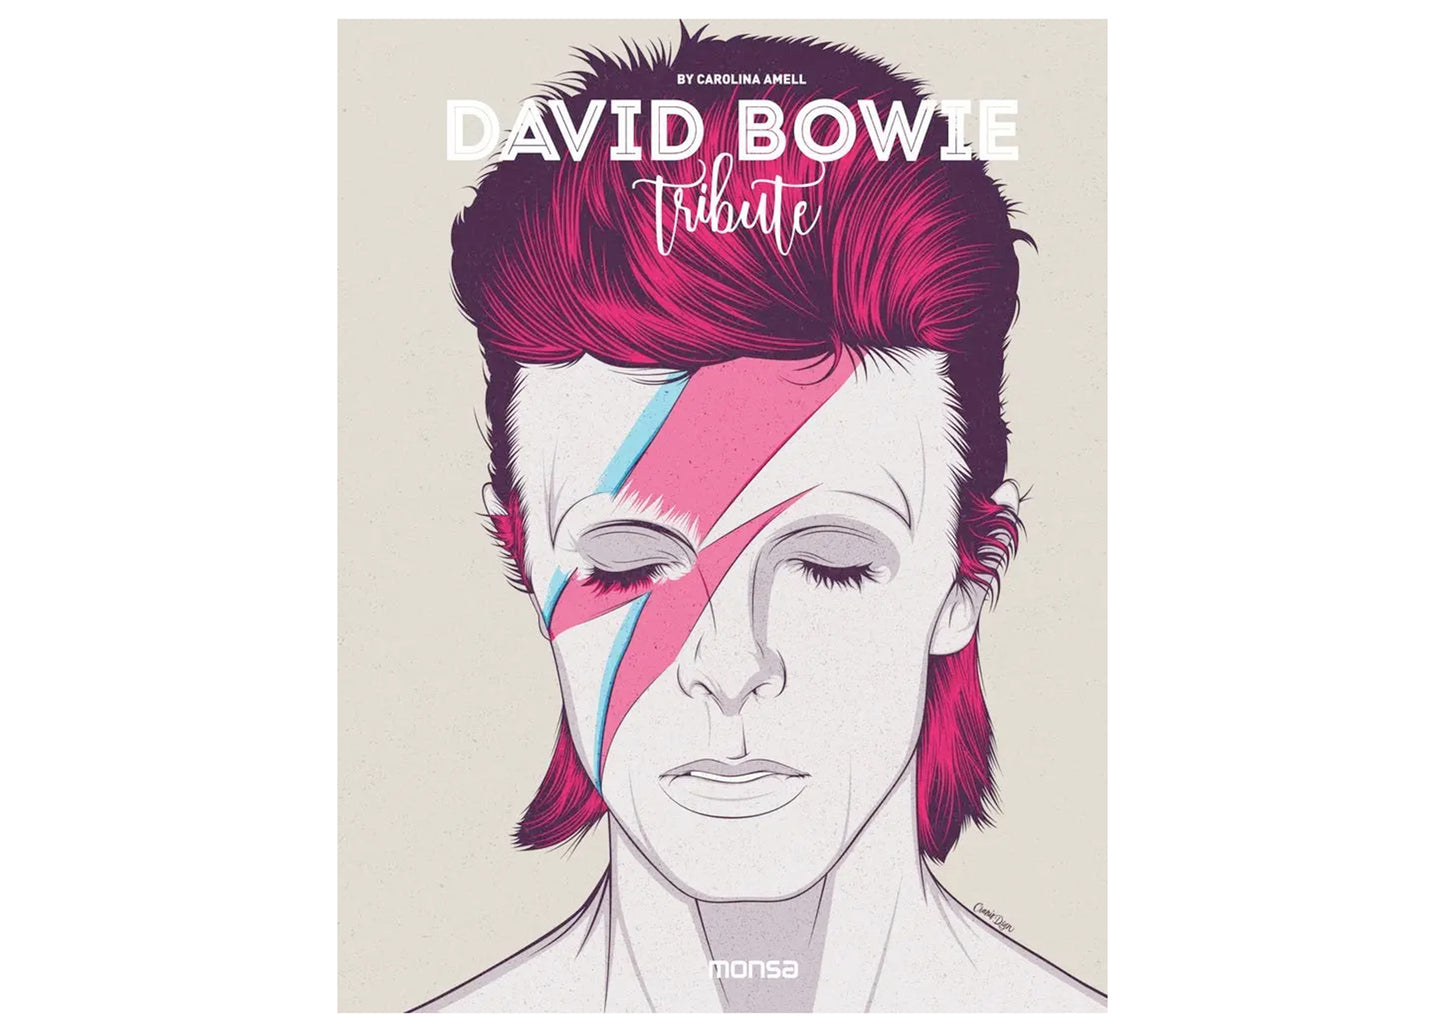 David Bowie: Tribute (Spanish Edition) Book